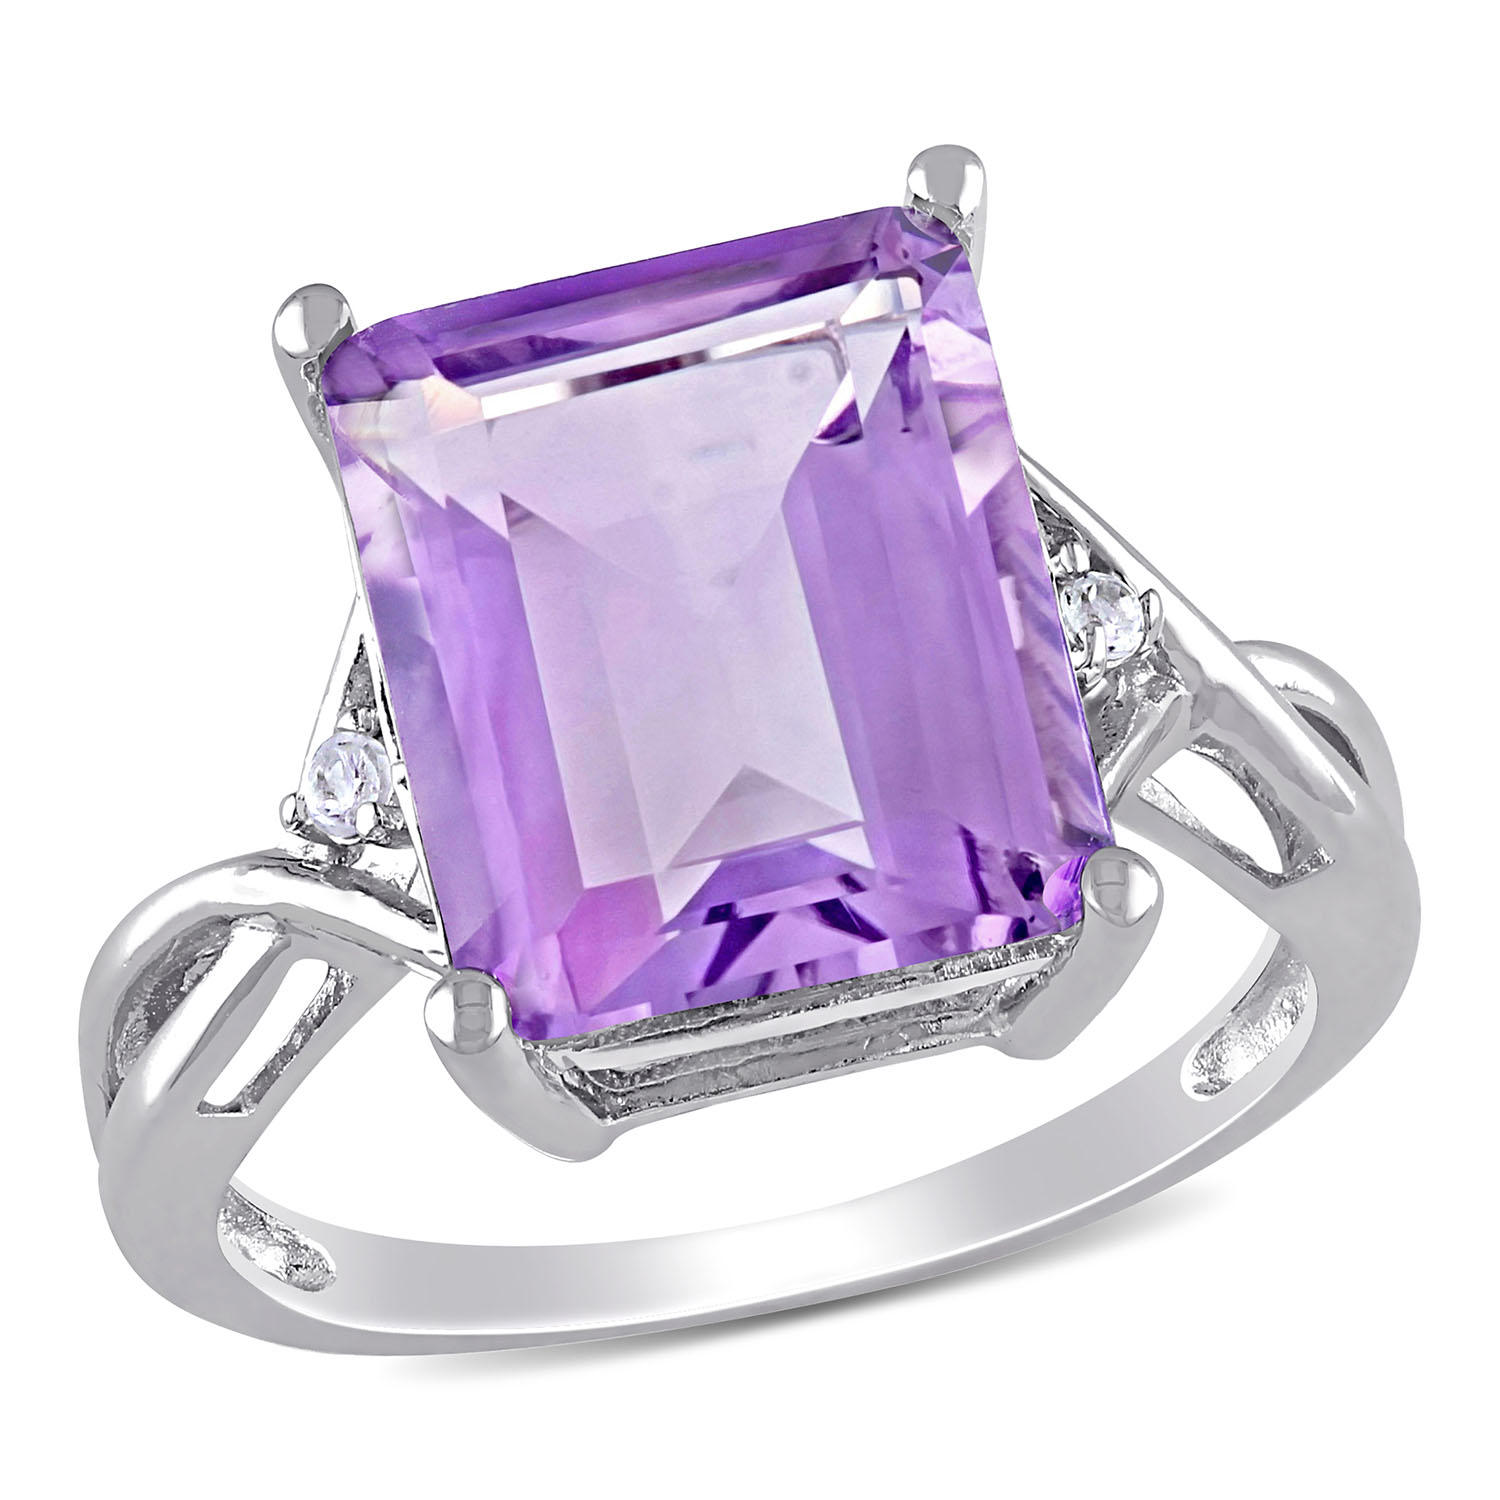 5.91 ct. Emerald Cut Amethyst and White Topaz Cocktail Ring in Sterling Silver 7